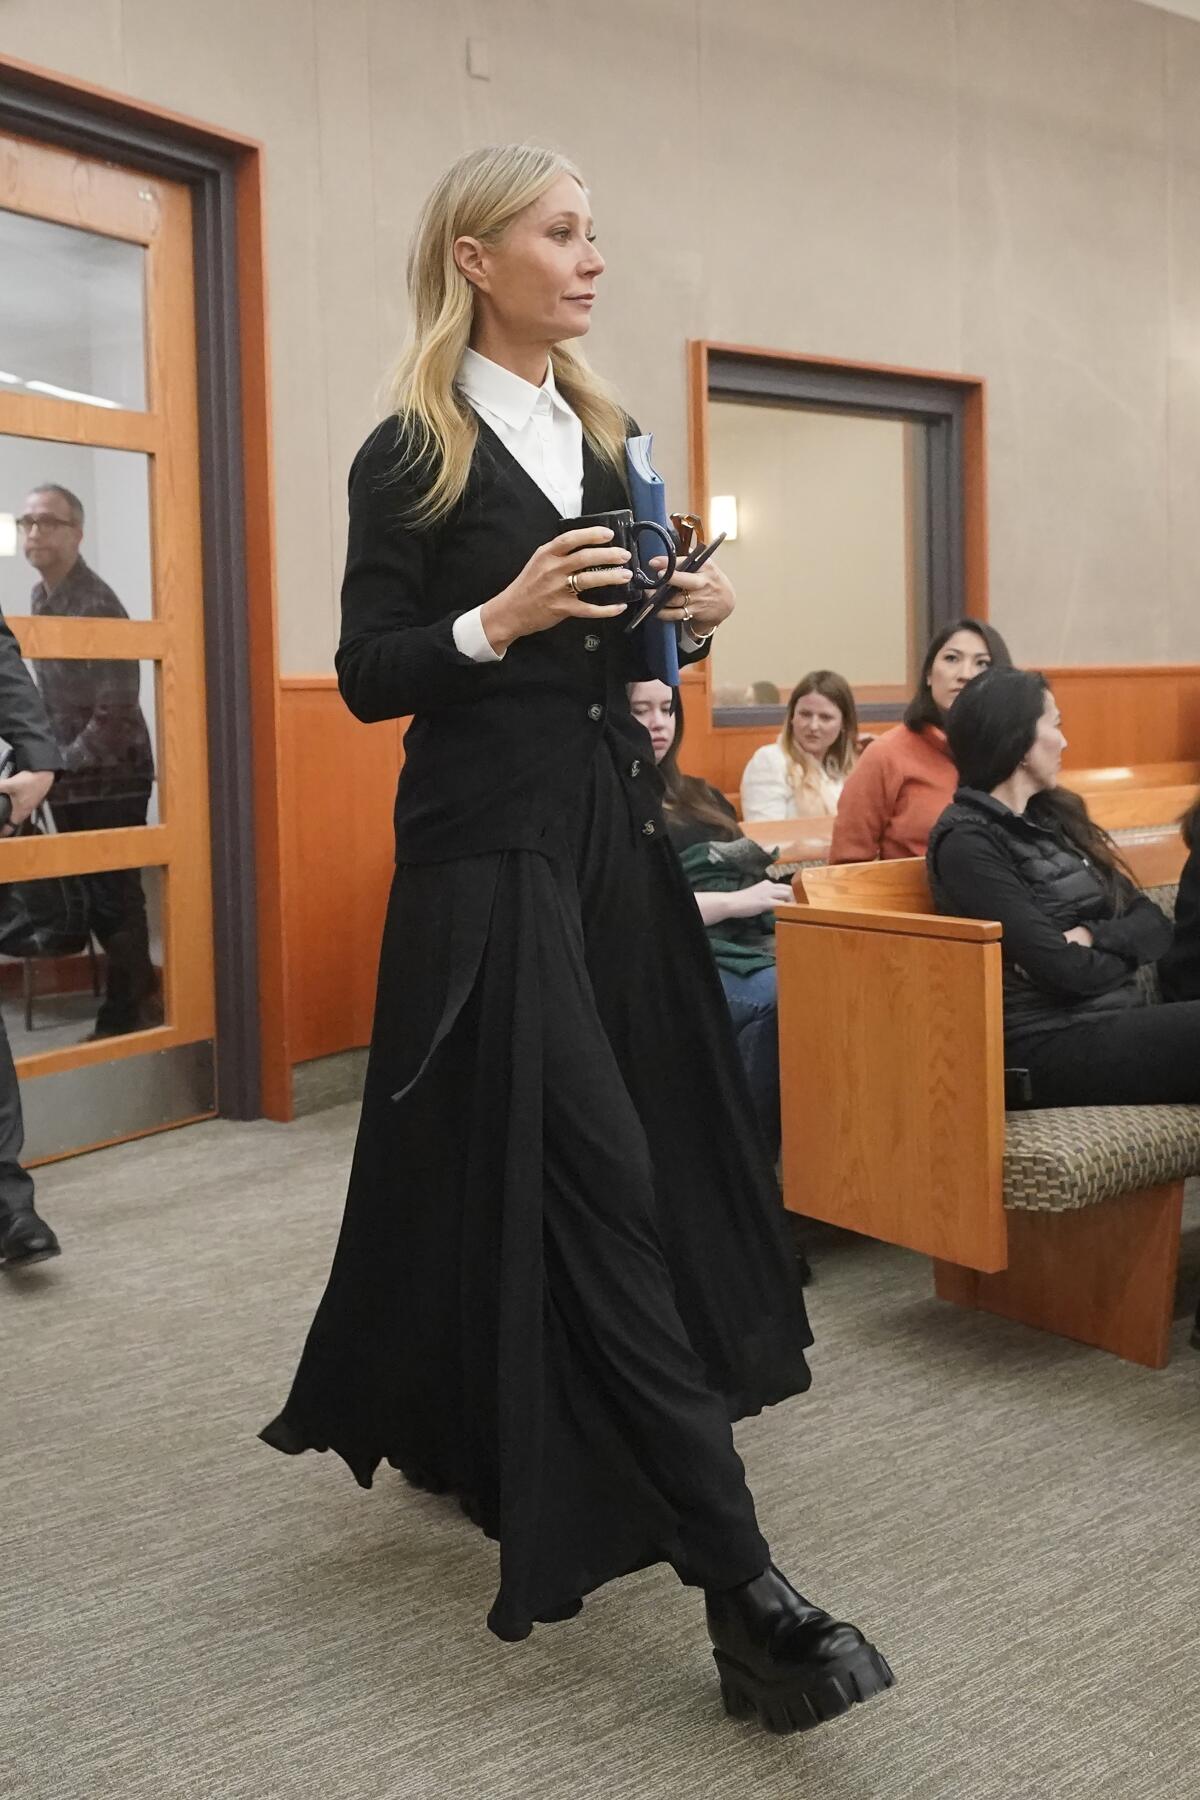 Gwyneth Paltrow enters the courtroom for her trial, Monday, March 27, 2023, in Park City, Utah.